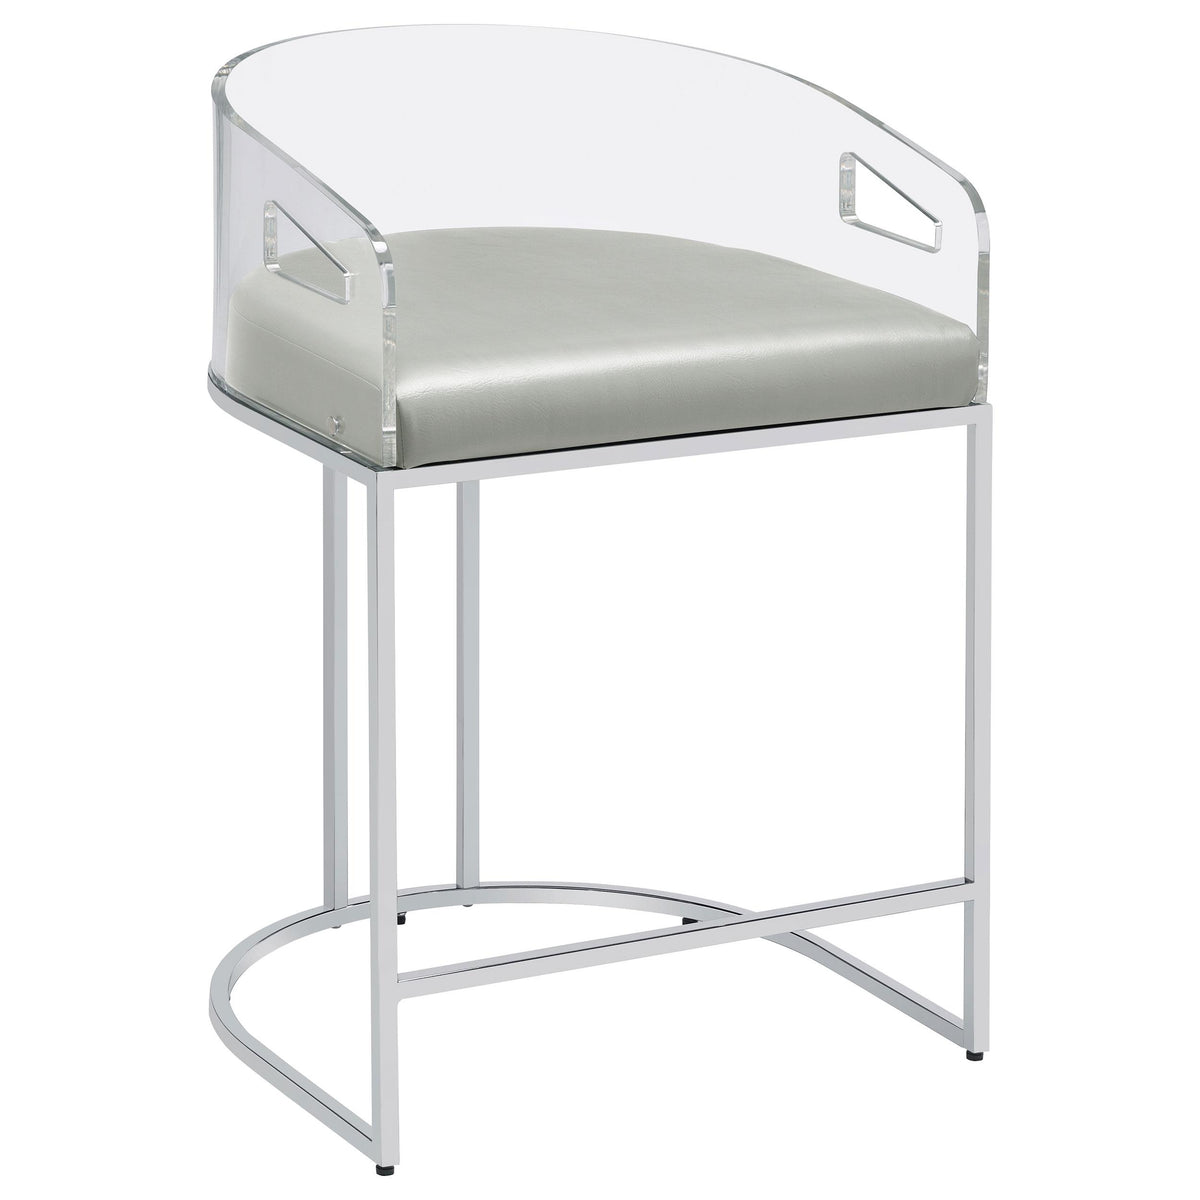 Thermosolis Acrylic Back Counter Height Stools Grey and Chrome (Set of 2) Thermosolis Acrylic Back Counter Height Stools Grey and Chrome (Set of 2) Half Price Furniture